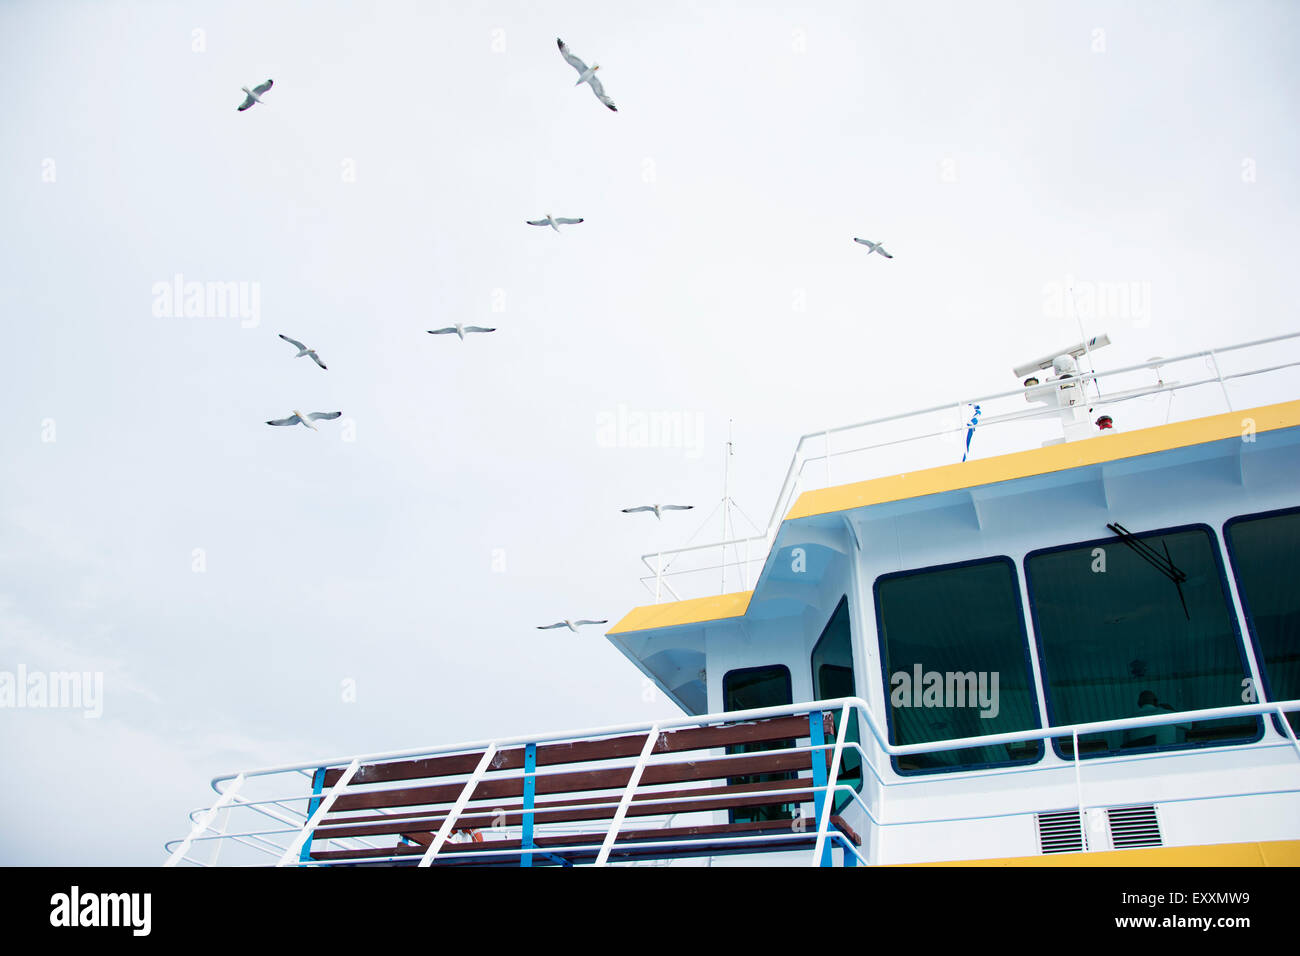 Seagulls flying over captain cabin on ferry boat Stock Photo